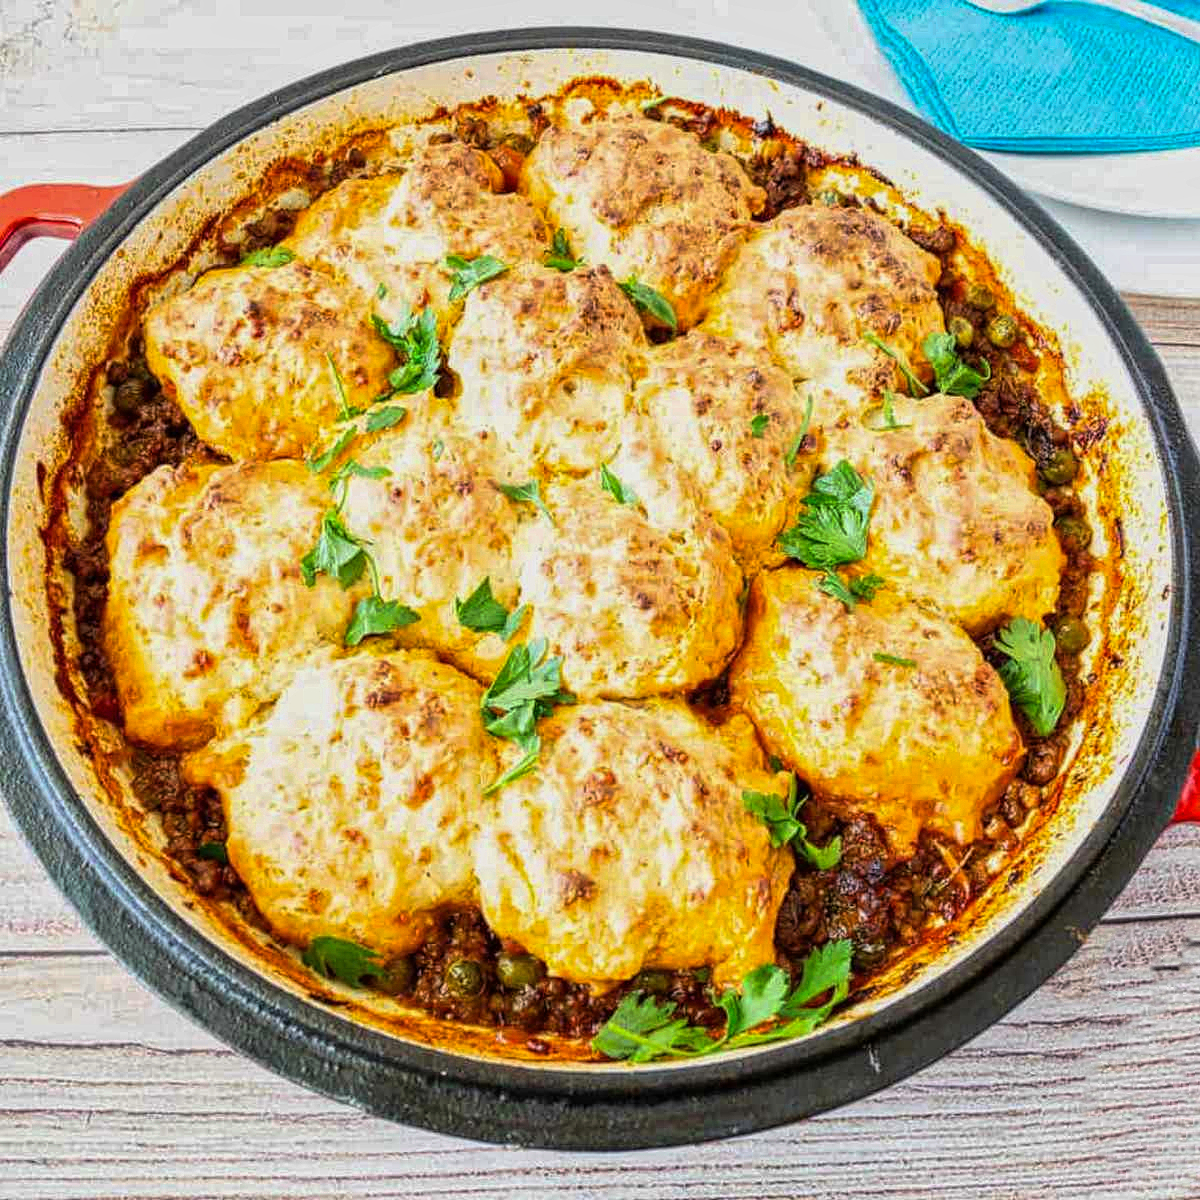 13. Ground Beef Casserole with Cheddar Cheese Biscuits